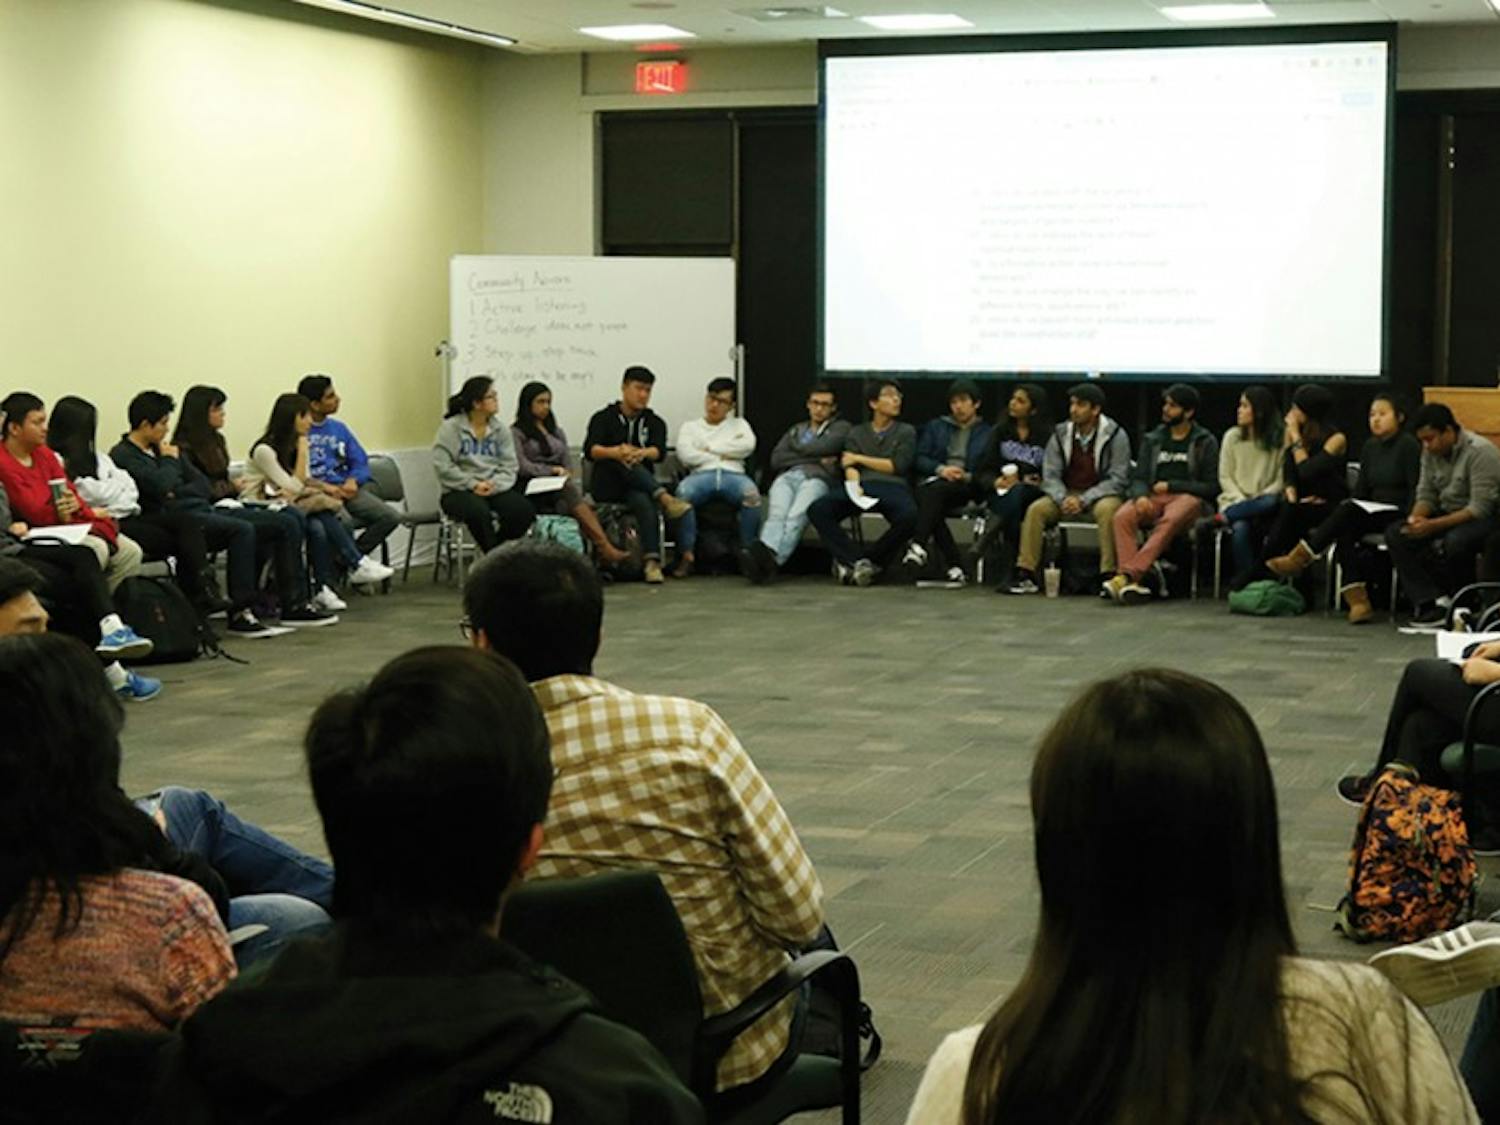 Members of the Asian community at Duke discussed issues ranging from&nbsp;the portrayal of Asians in the media to generational divides.